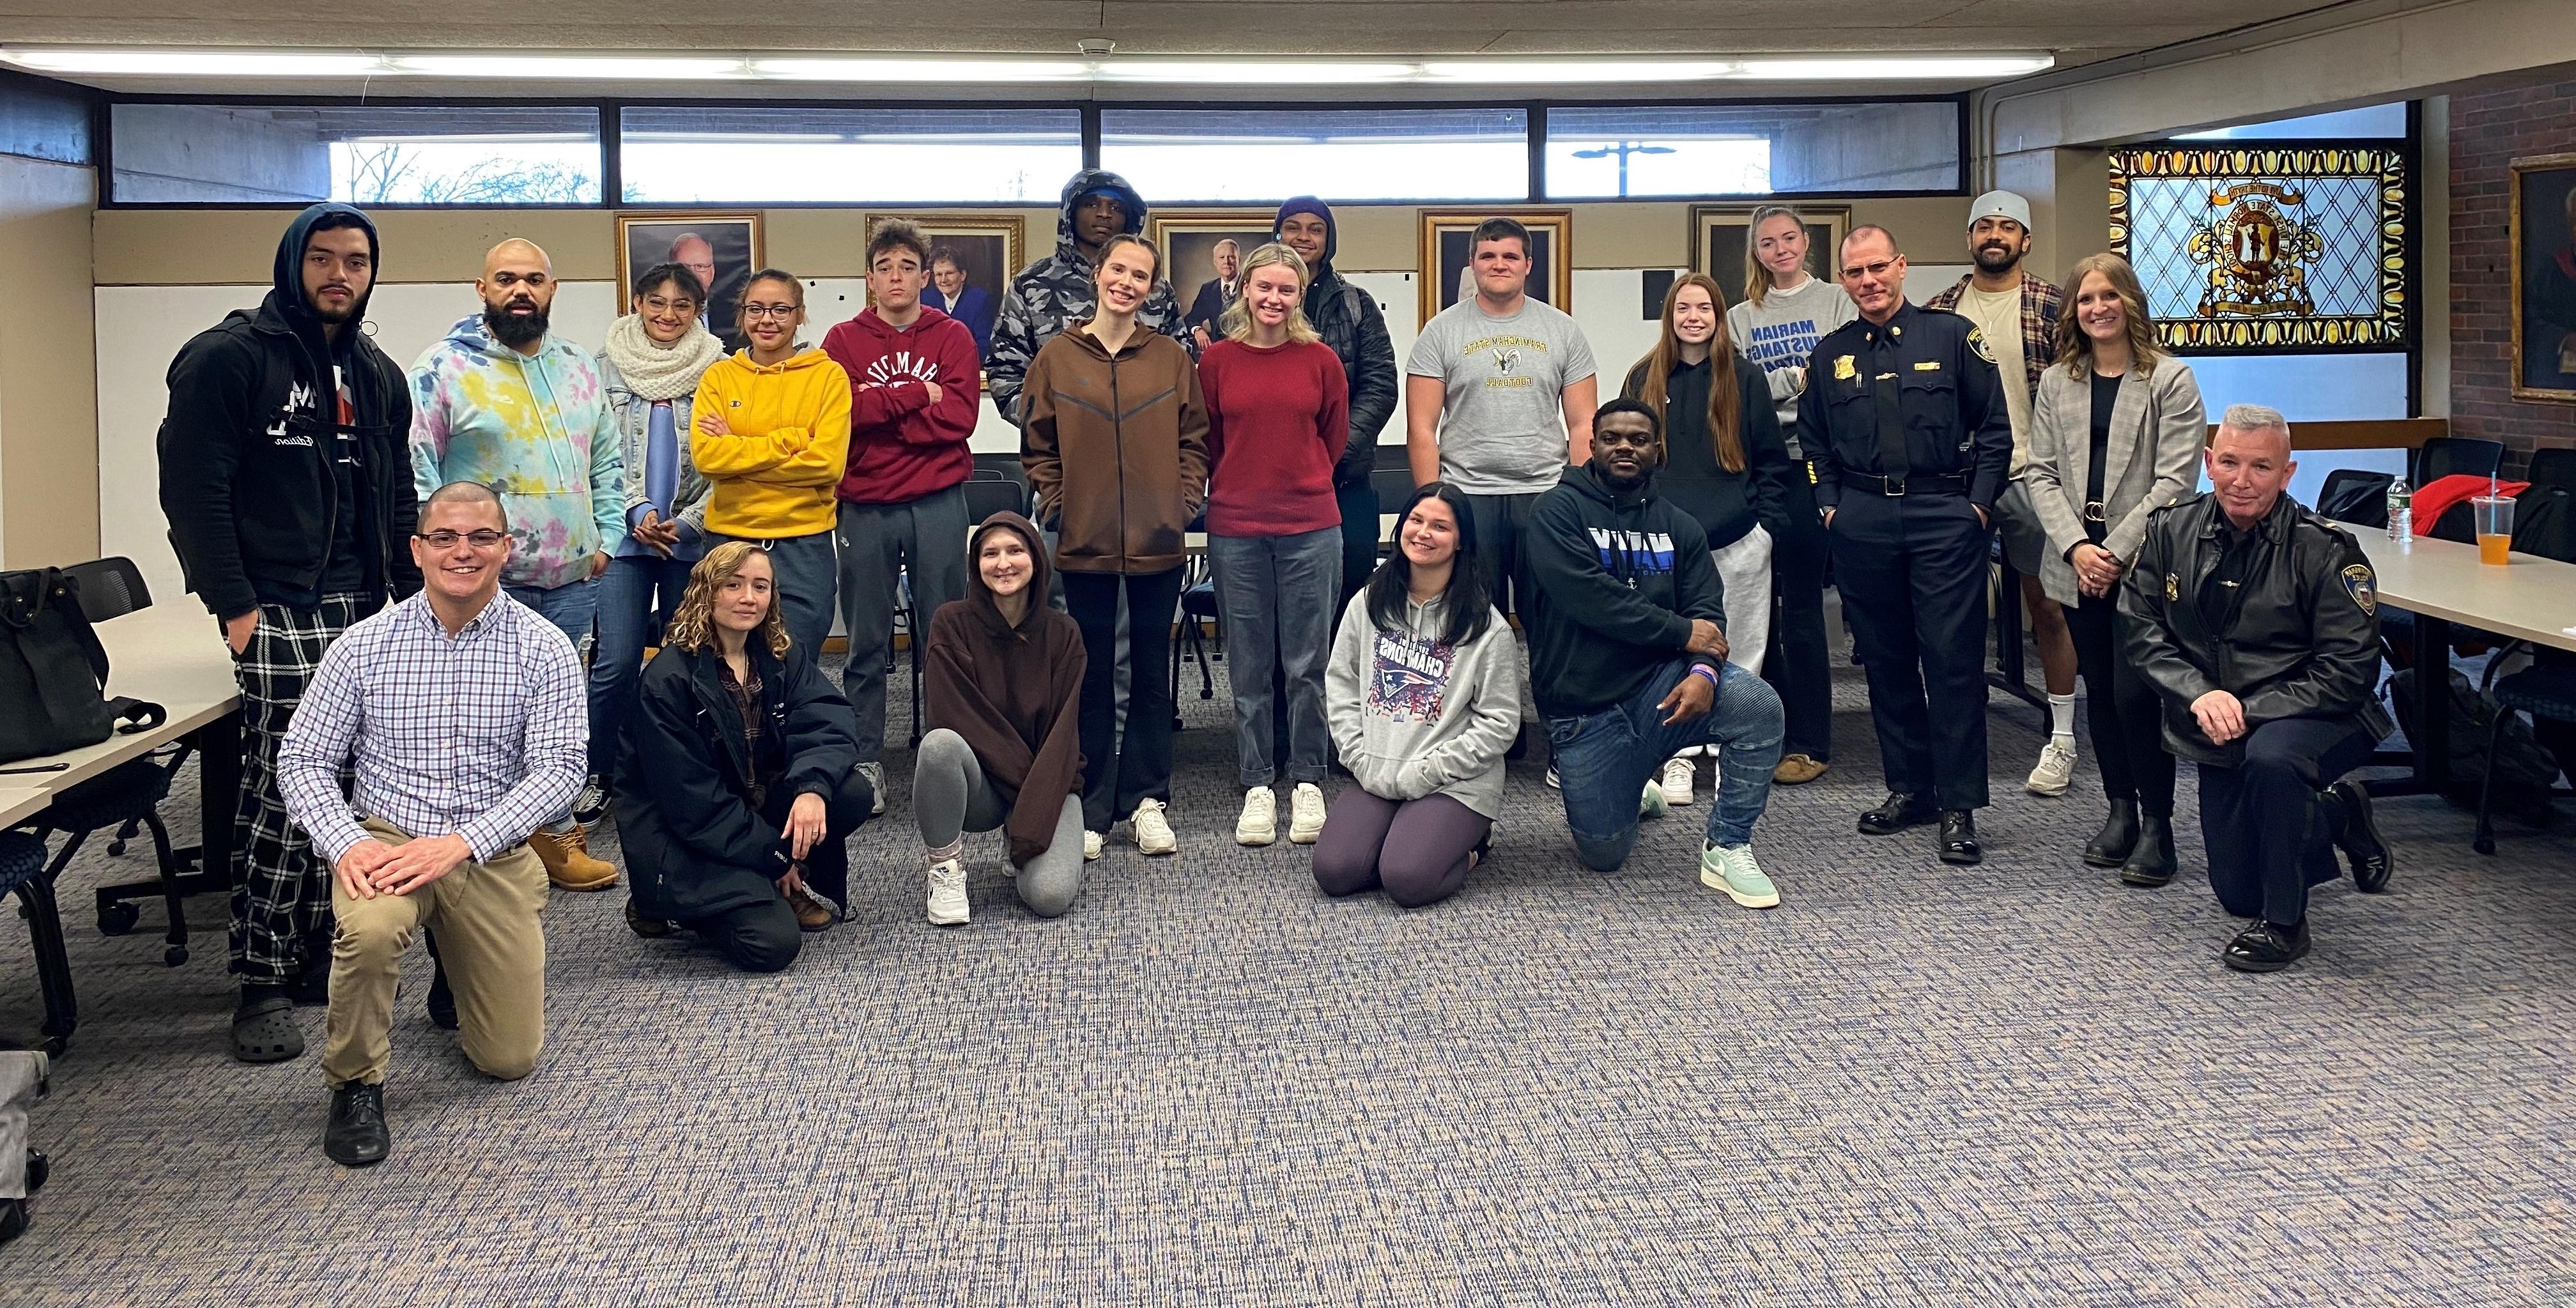 Job Corps, FPD and Juvenile Delinquency class roundtable discussion